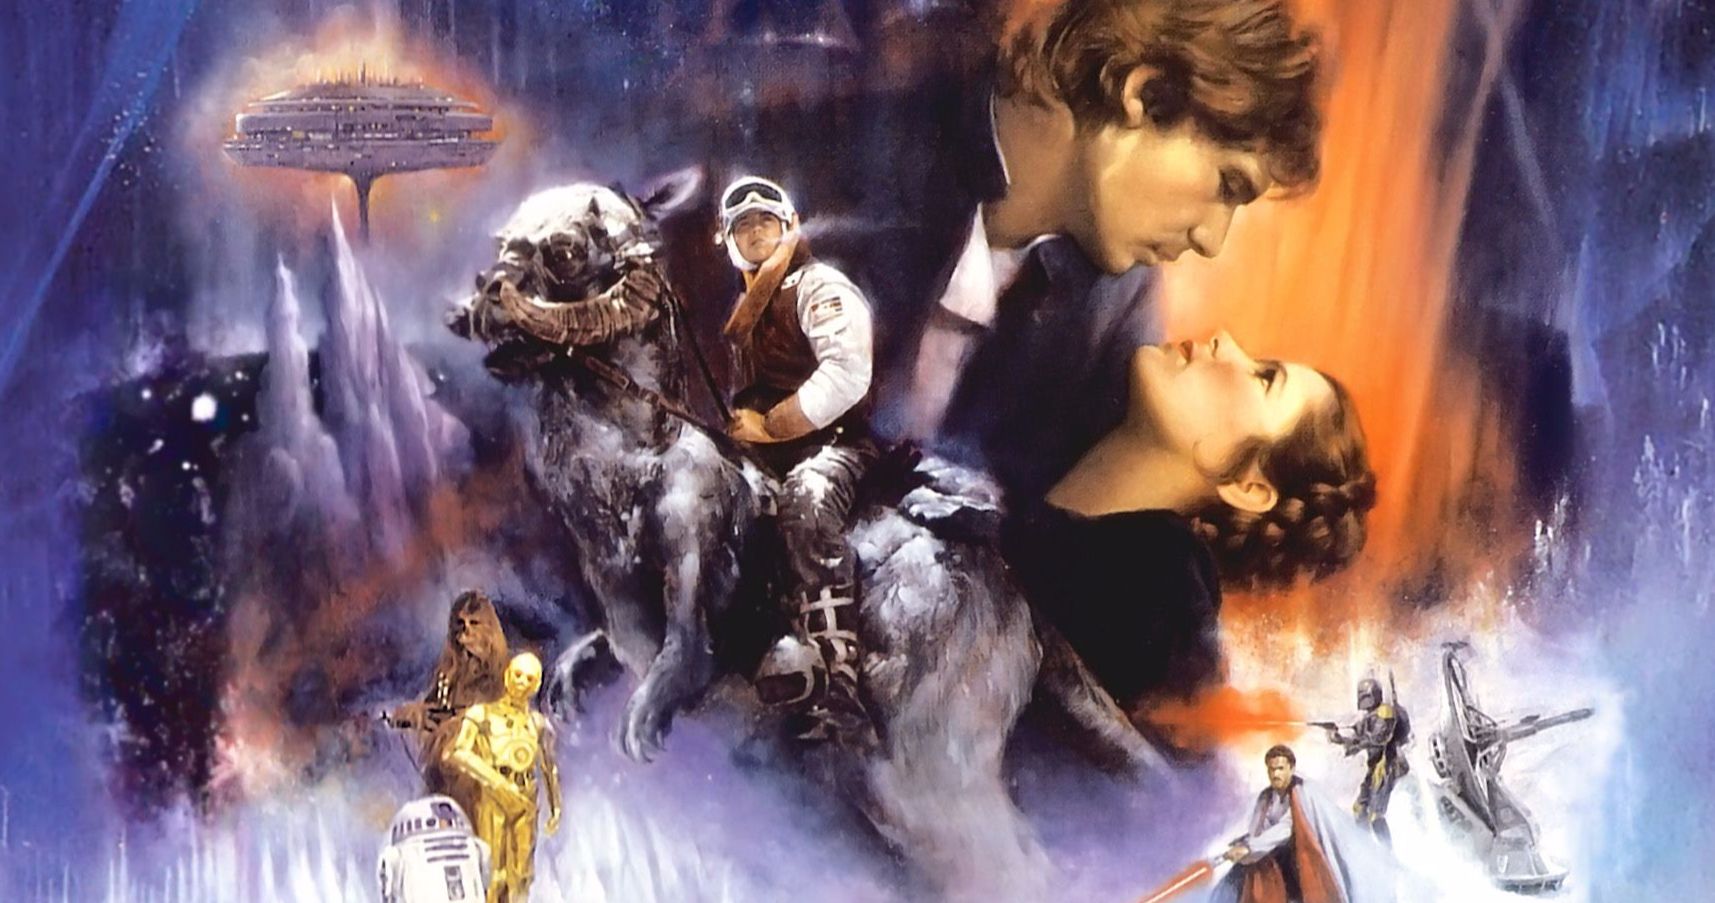 The Empire Strikes Back Wins the Weekend Box Office for First Time in 2 Decades